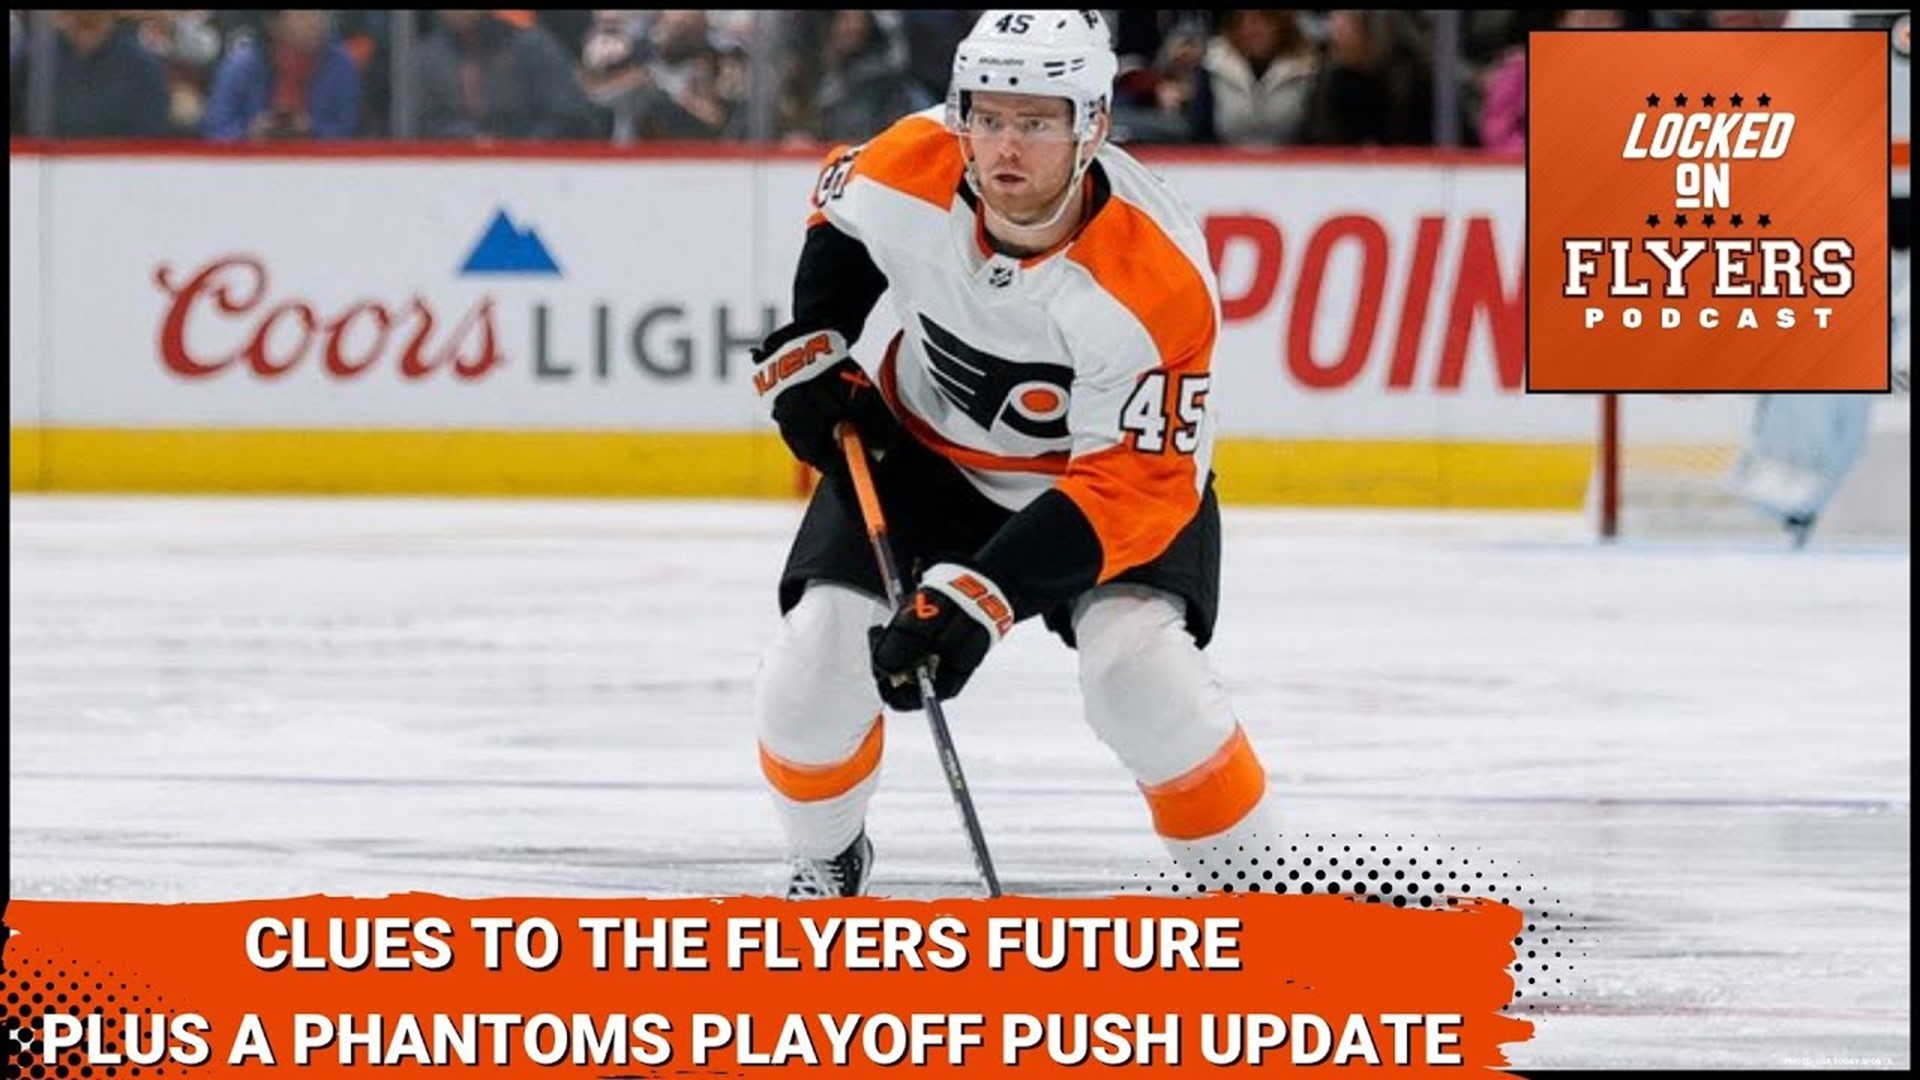 Russ & Rachel discuss the latest in the plan for the Philadelphia Flyers moving forward, including thoughts from John Tortorella on Danny Briere.